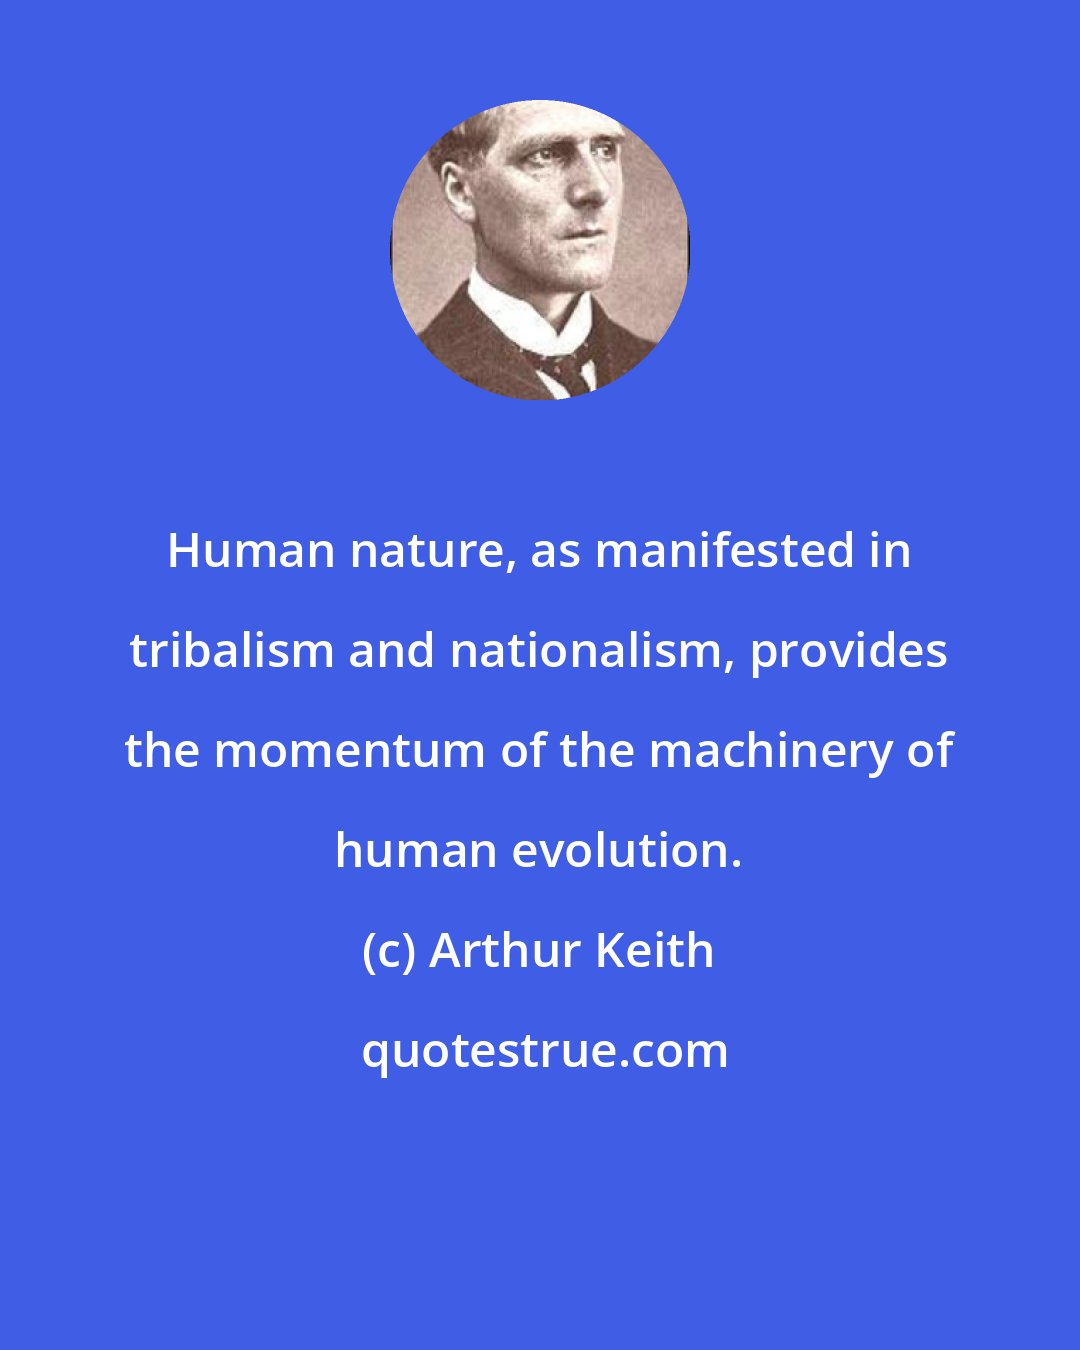 Arthur Keith: Human nature, as manifested in tribalism and nationalism, provides the momentum of the machinery of human evolution.